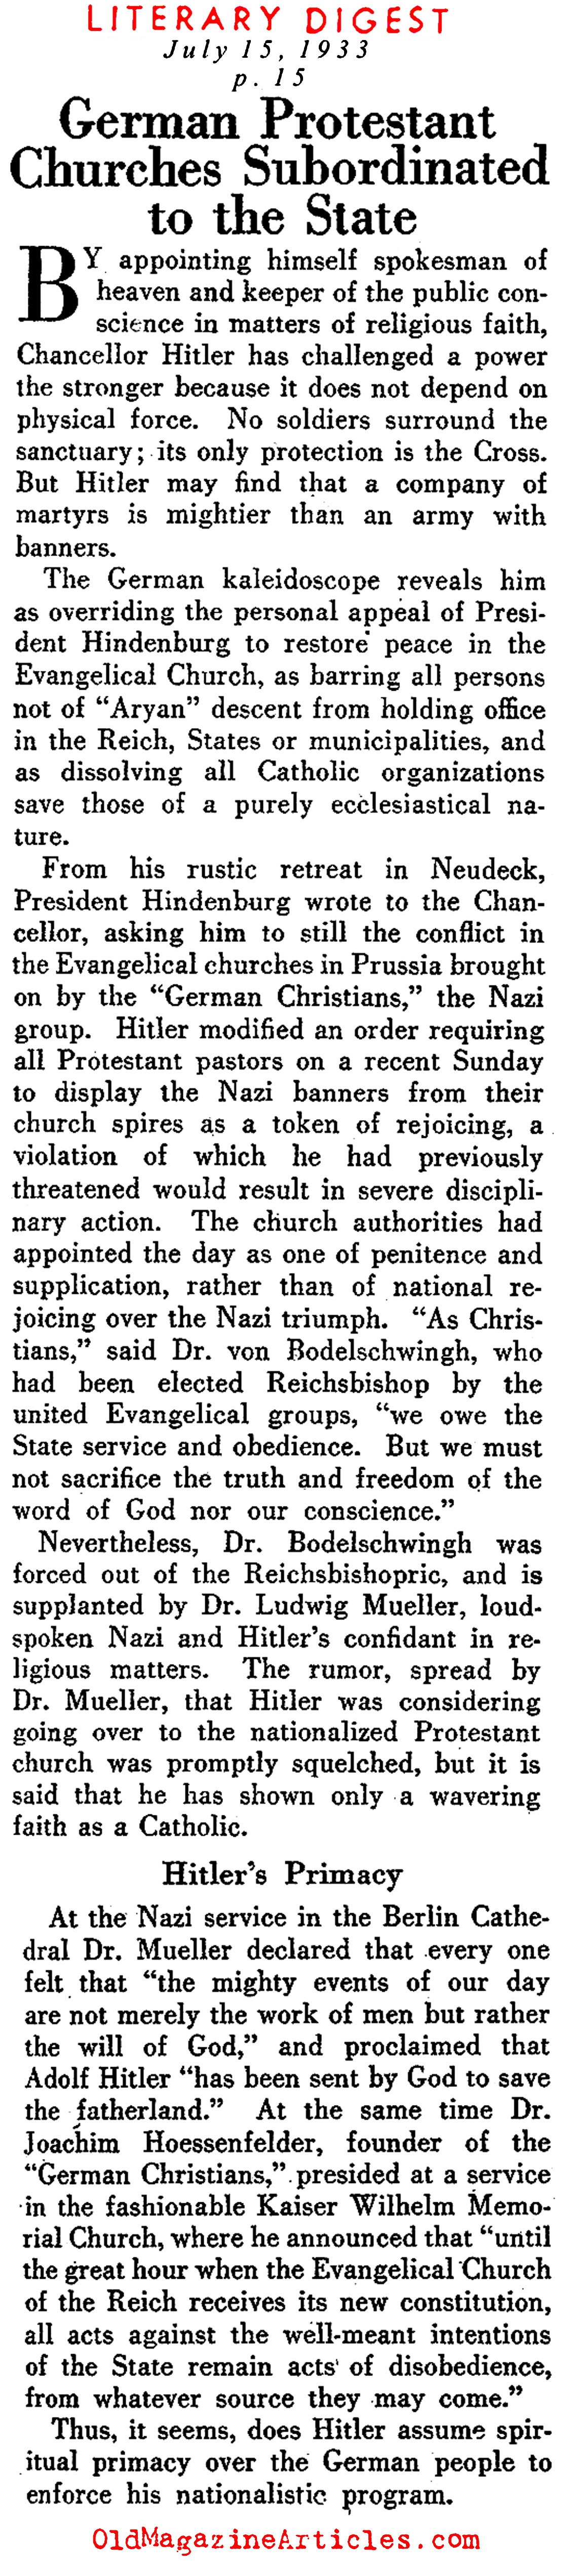 Protestant Churches Forced into Submission (Literary Digest, 1933)